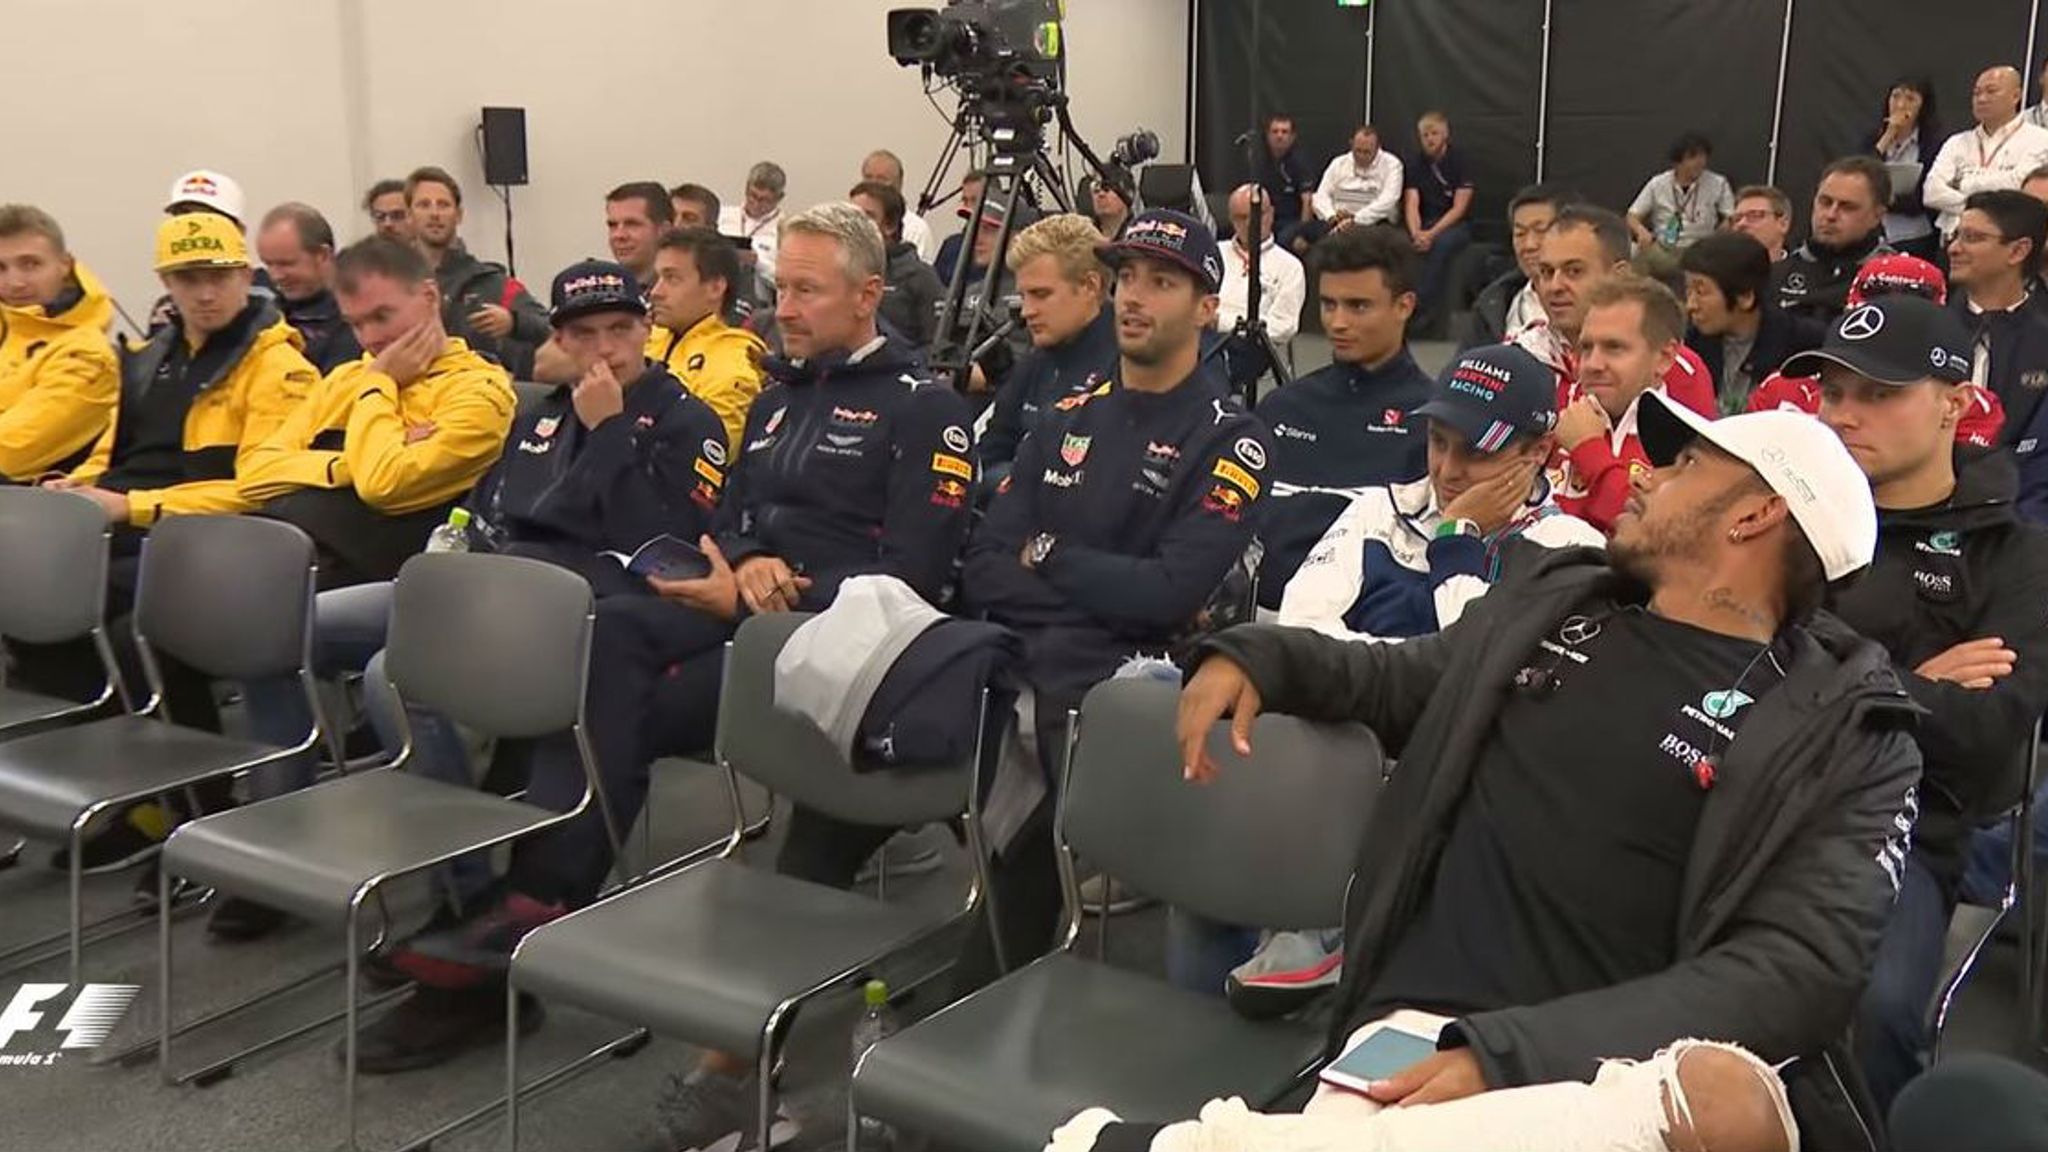 Behind the scenes at a drivers' briefing.